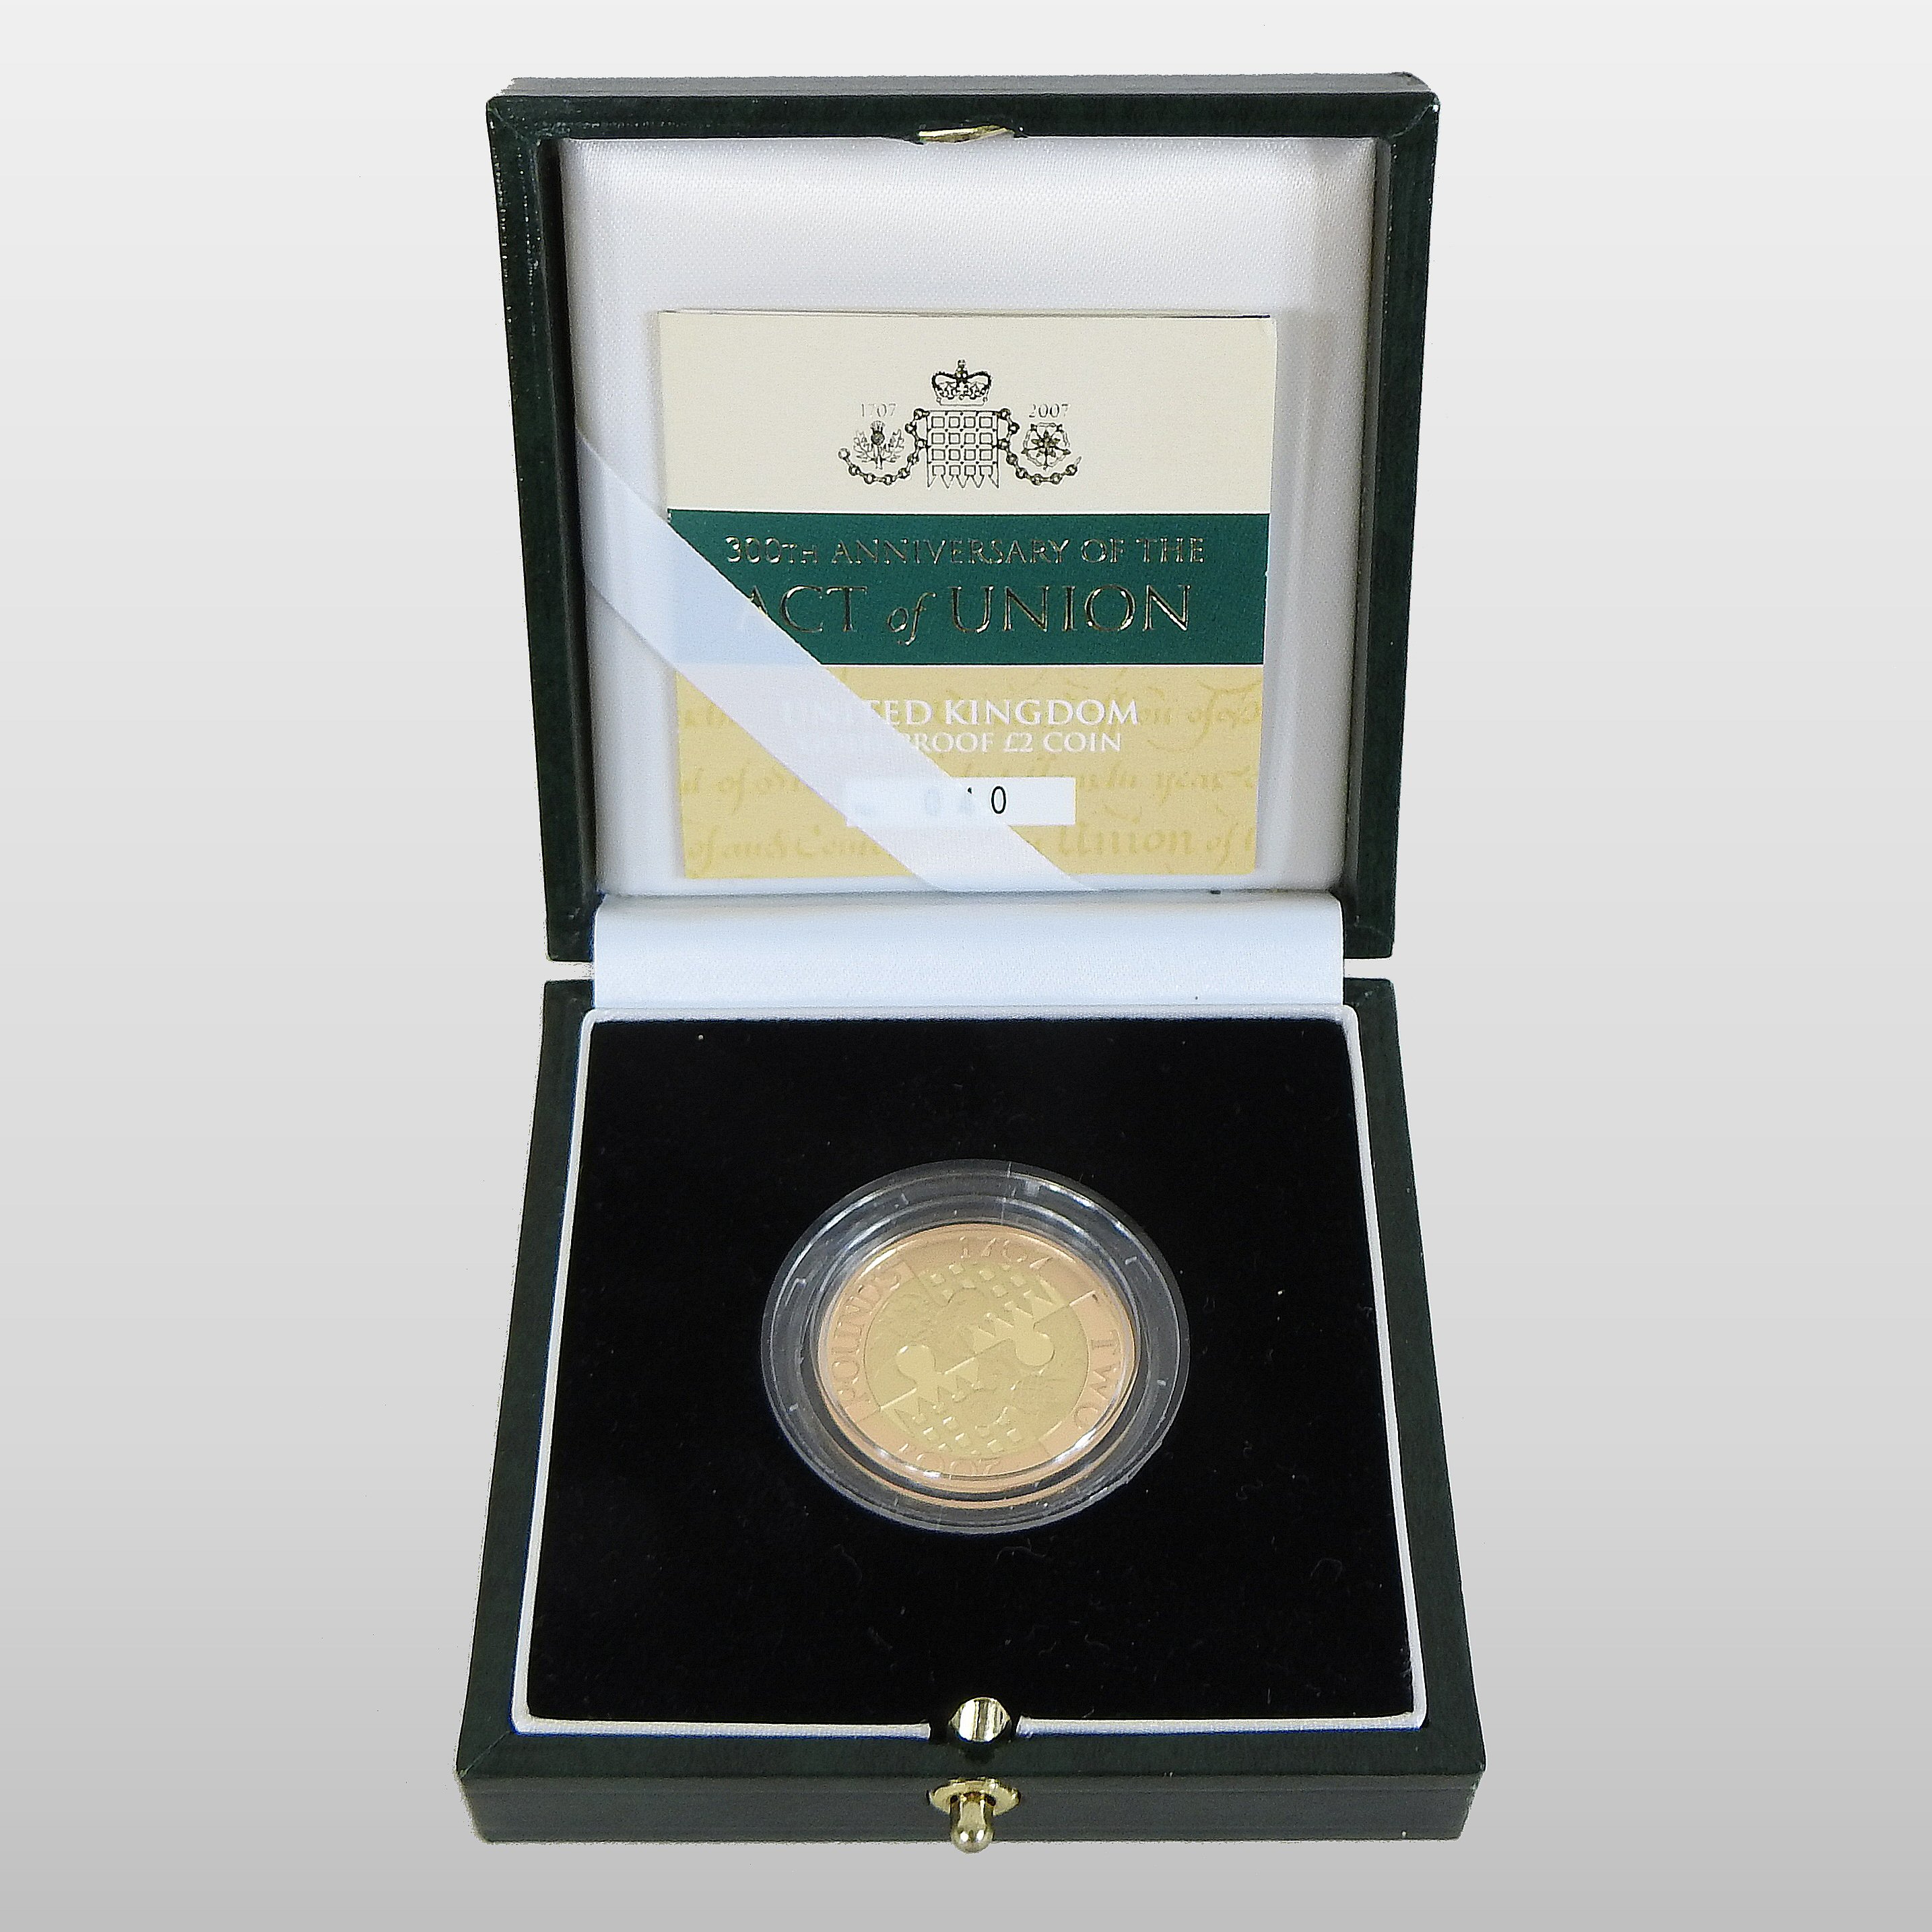 A 22 carat gold £2 proof coin, 2007, to commemorate the 300th anniversary of the Act of Union,